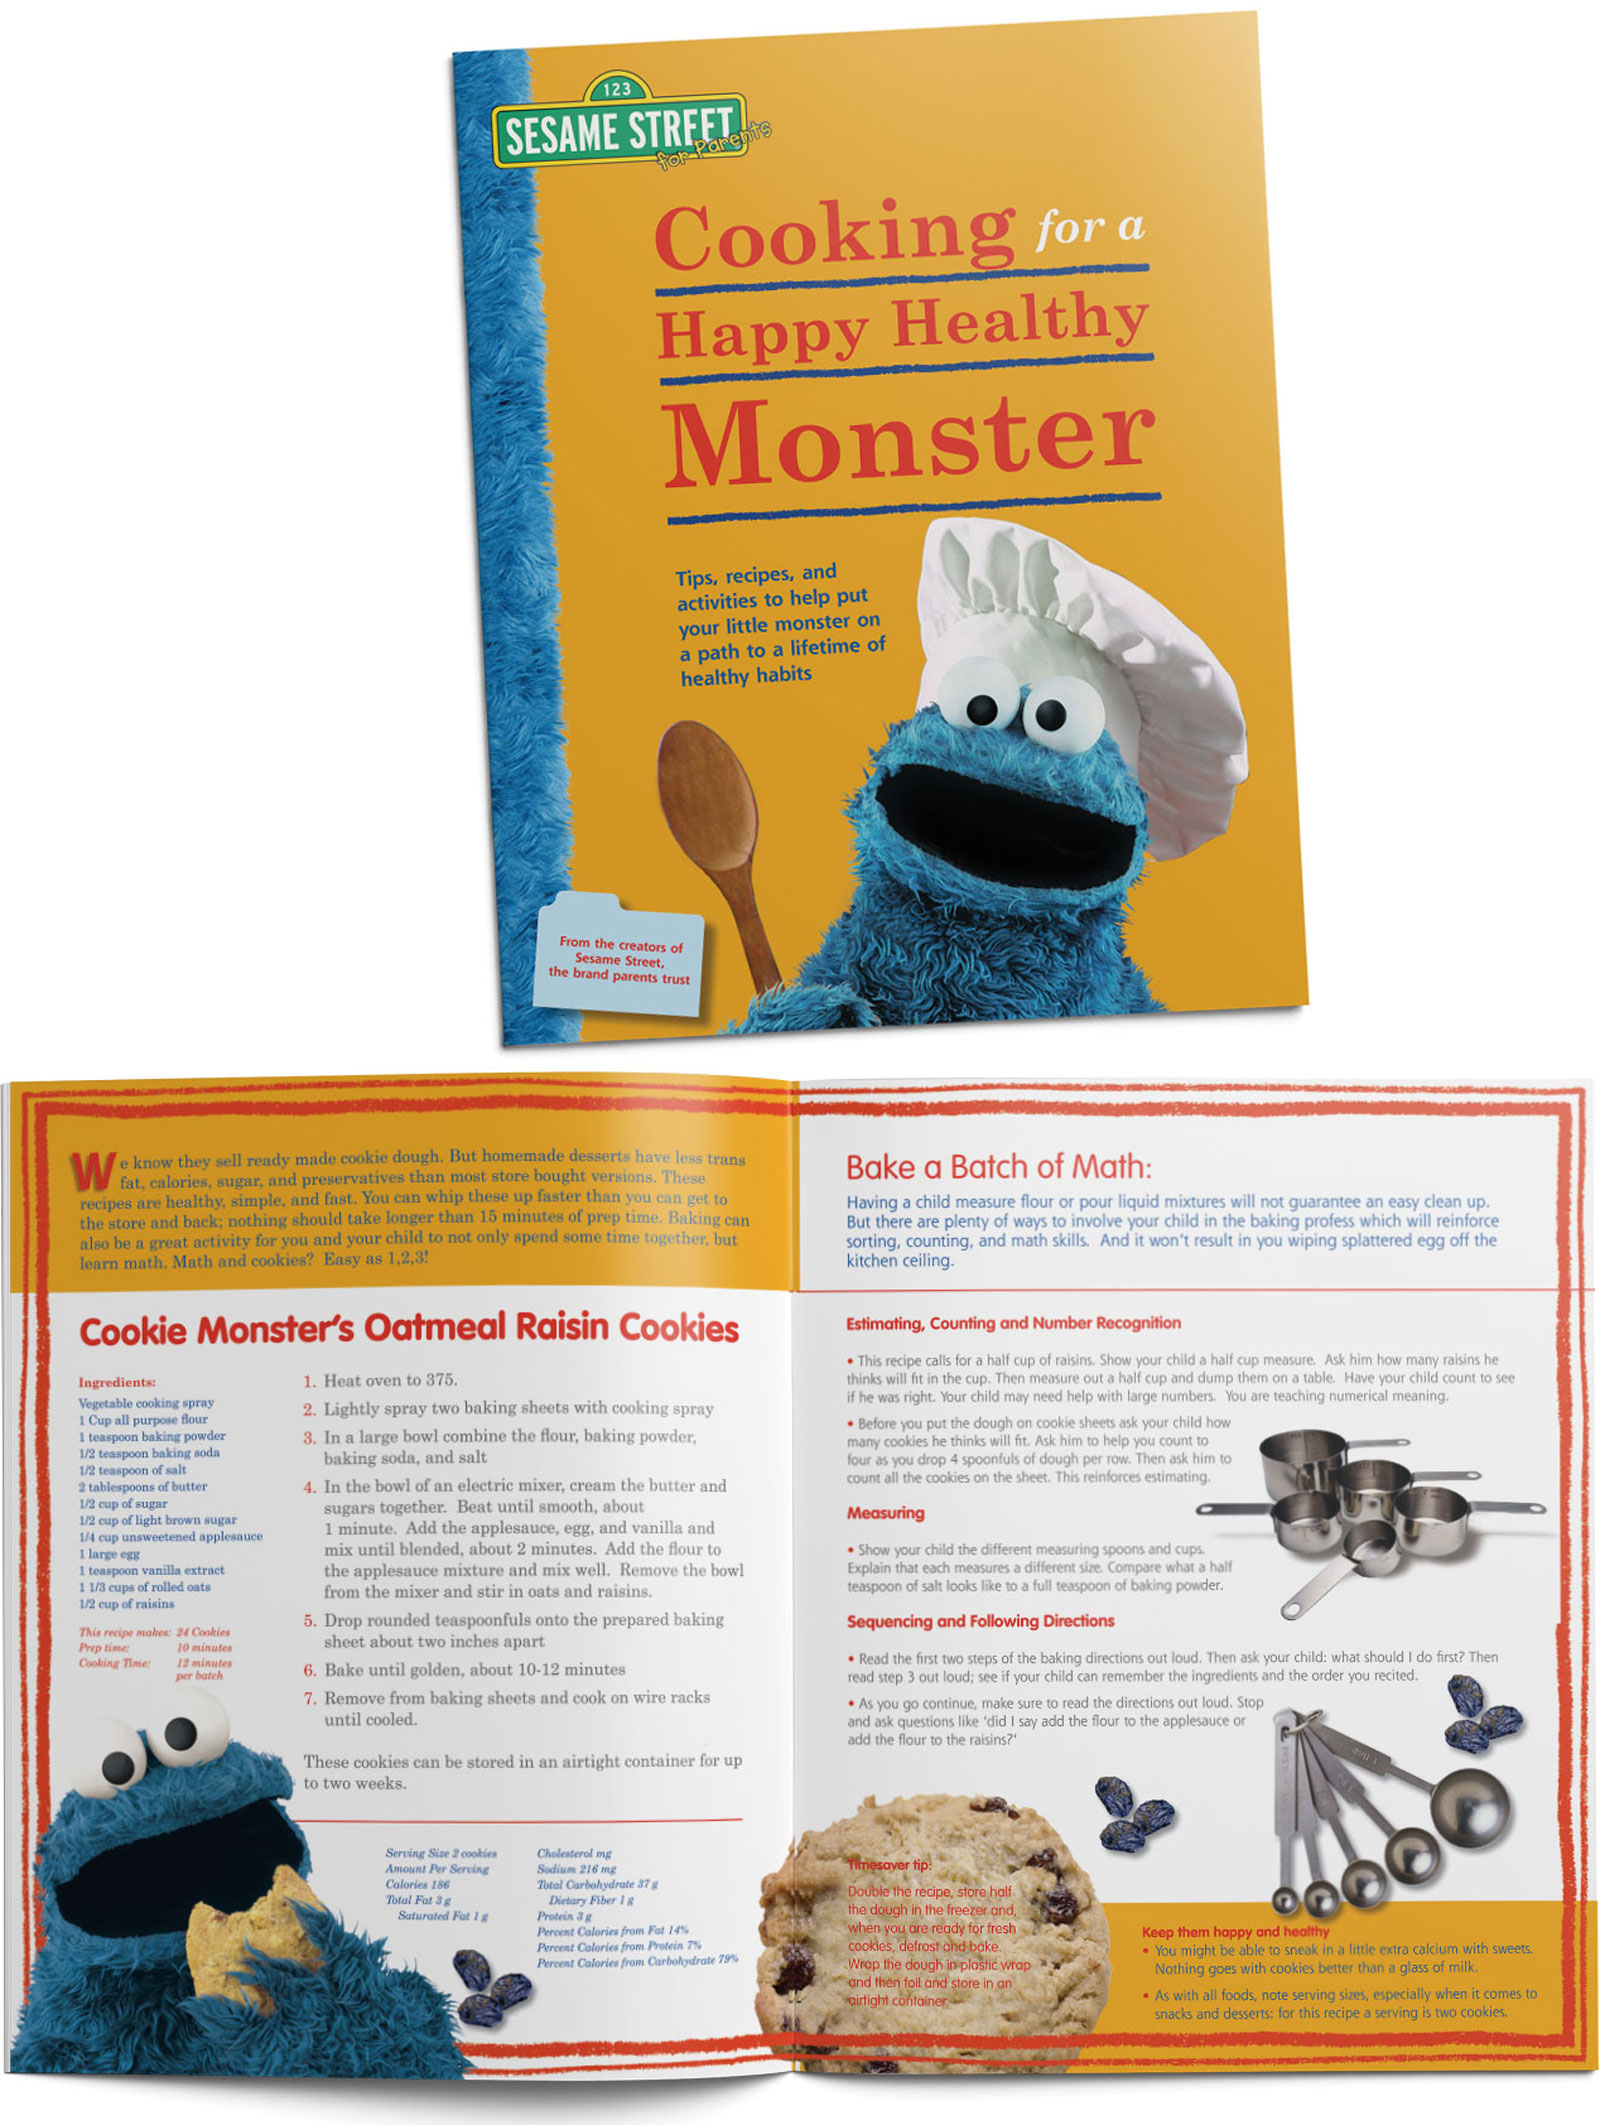 Sesame Street "Cooking for a Happy Healthy Monster" Cookbook